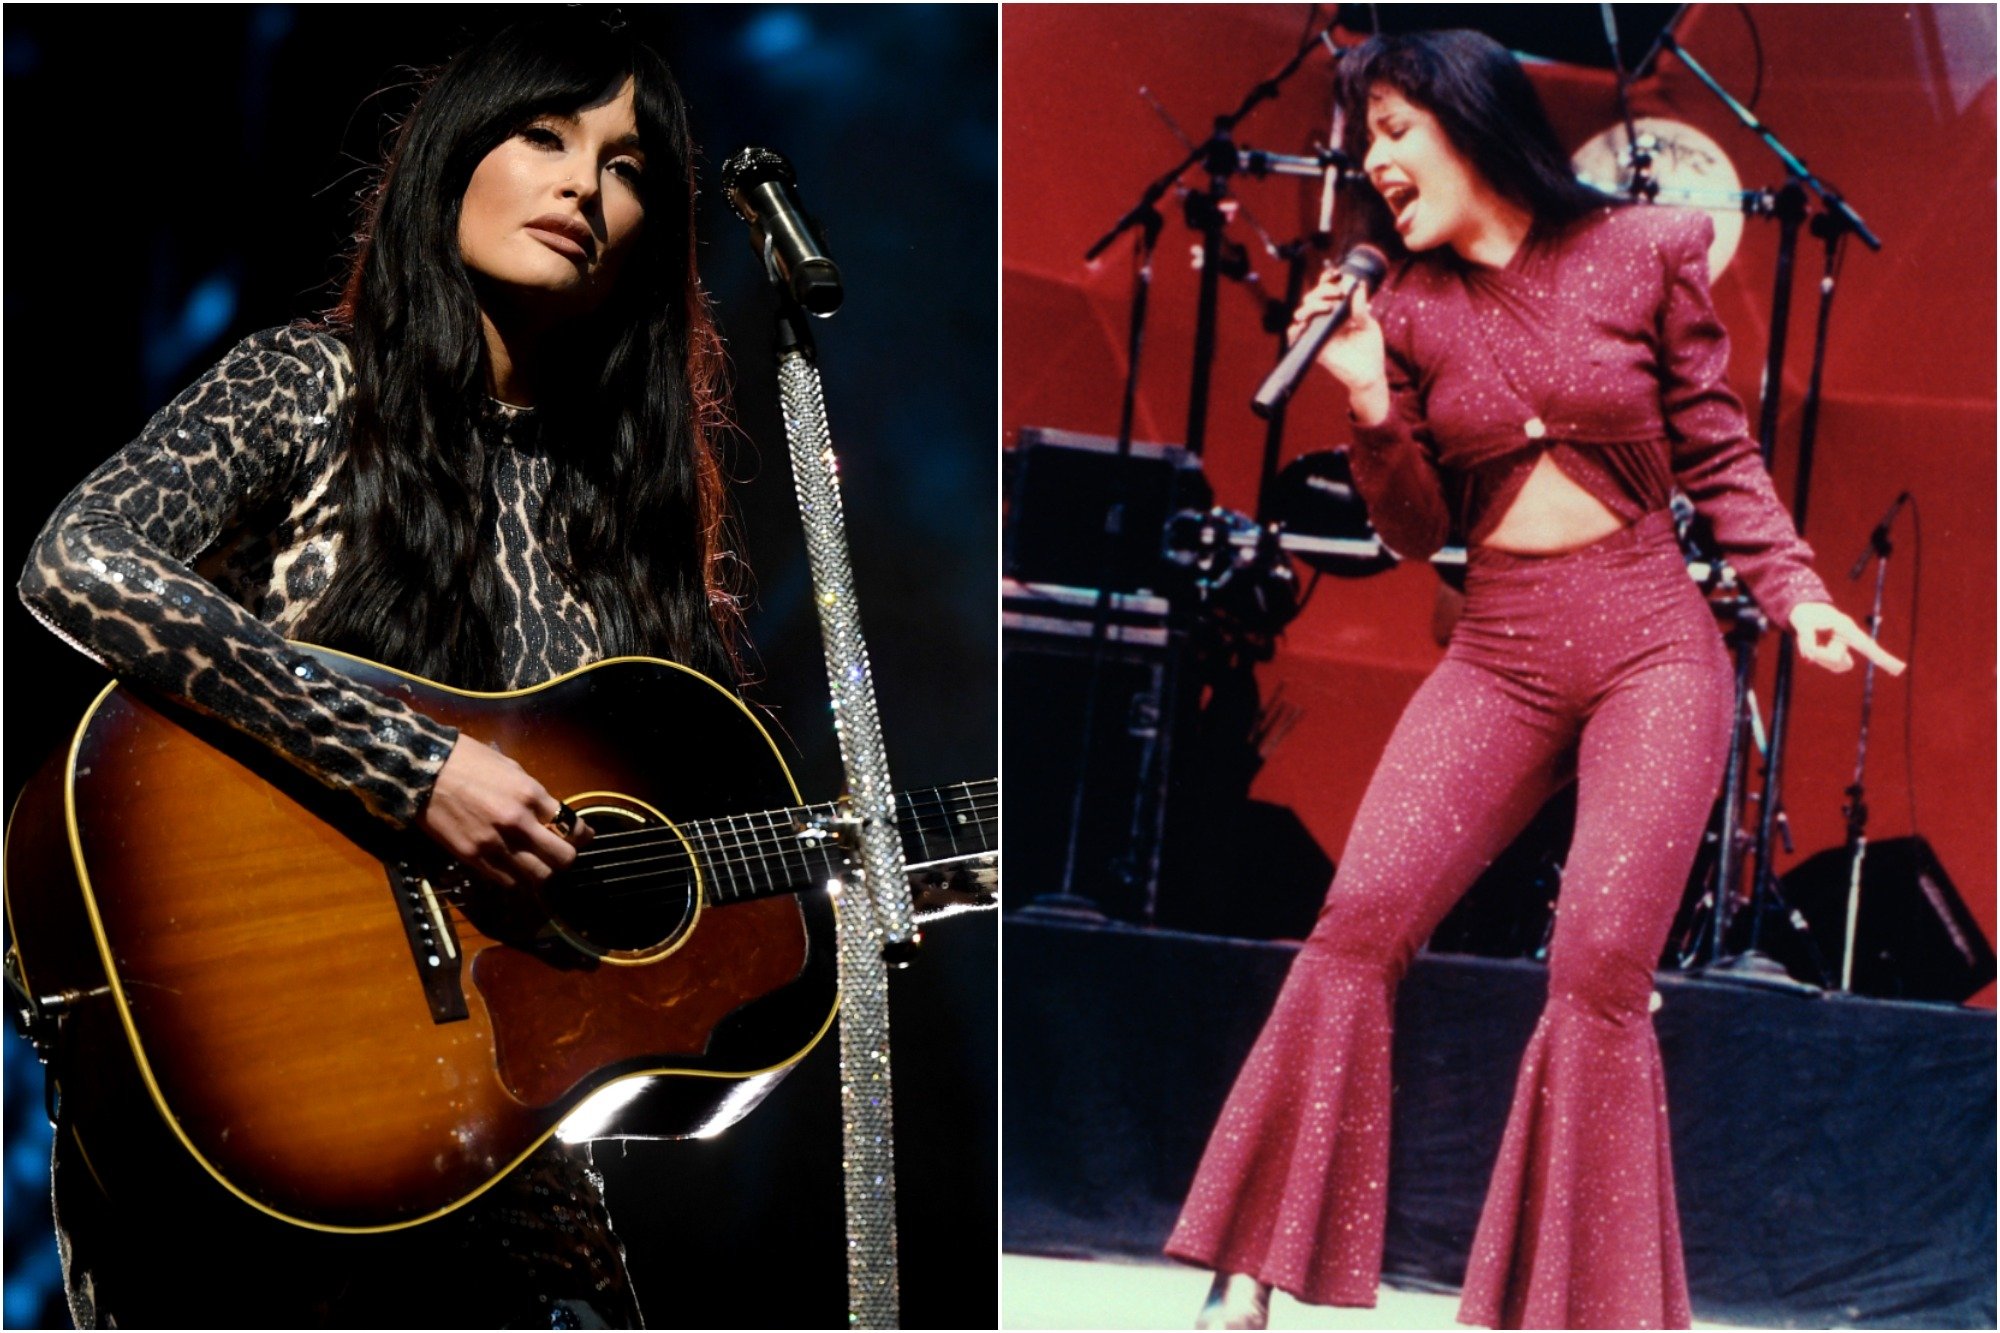 Kacey Musgraves at the Intersect music festival on Dec. 6, 2019 / Selena performing in her final concert before her death 